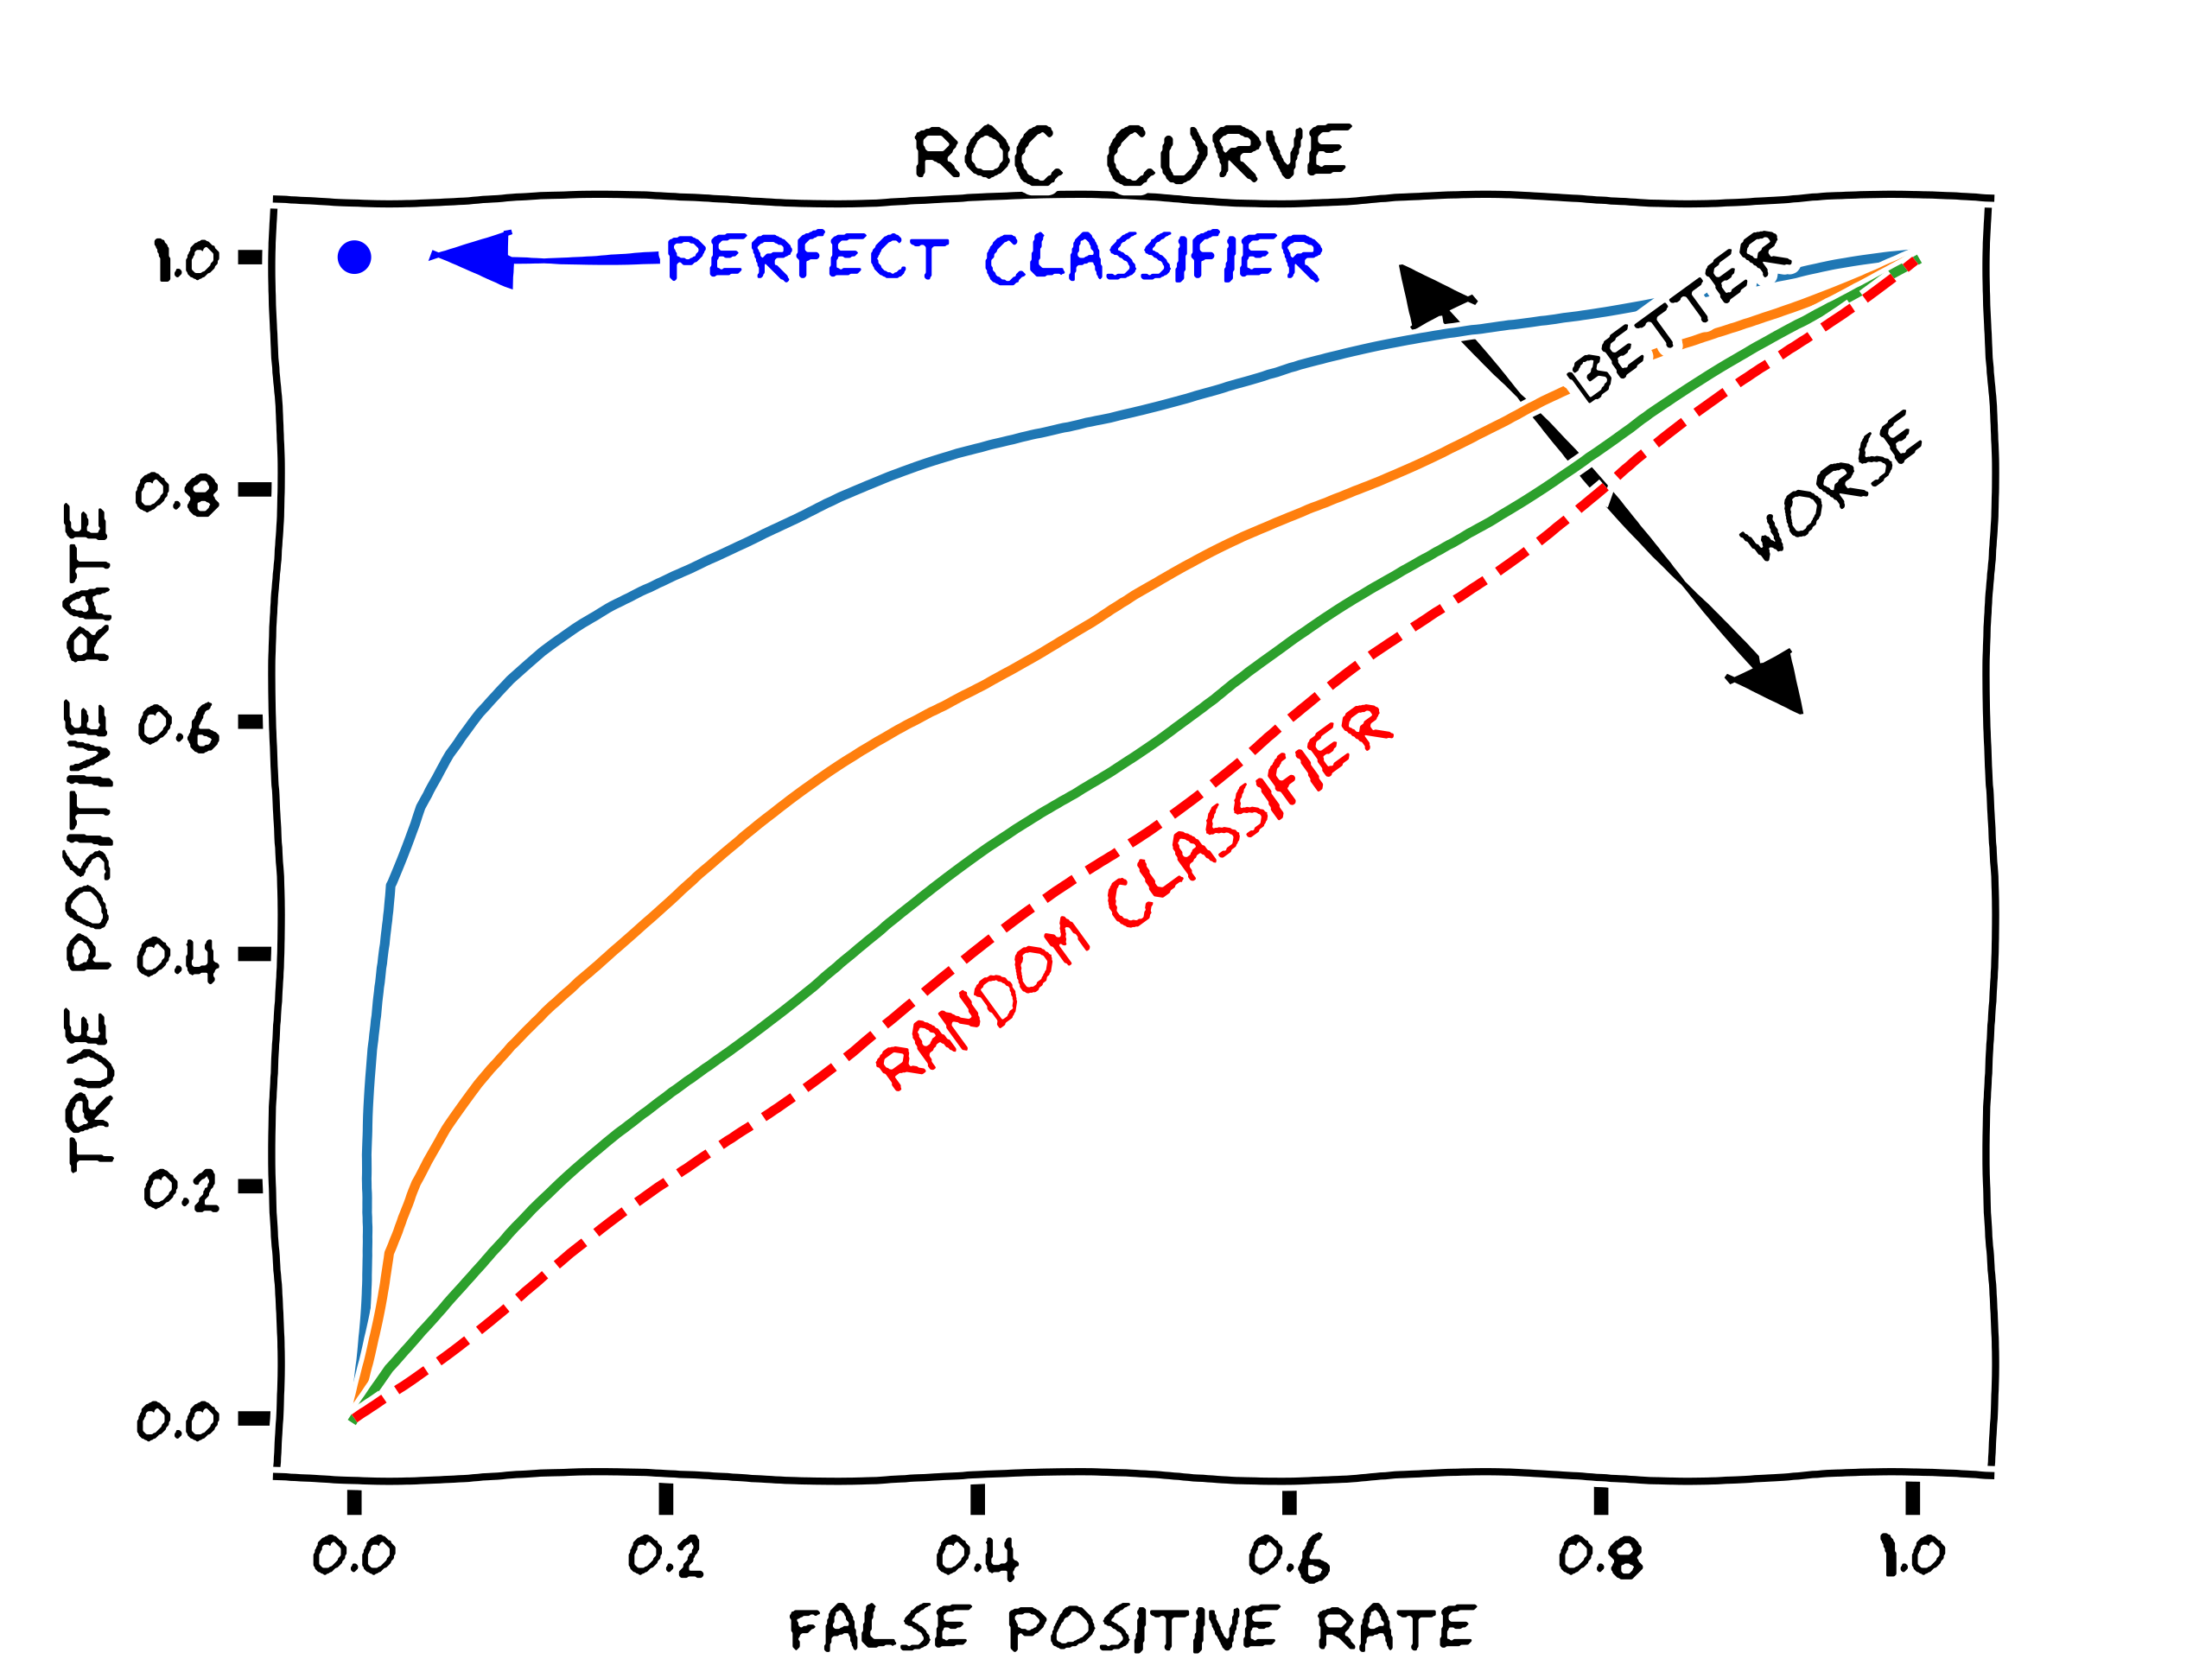 

<a href="https://en.wikipedia.org/wiki/Receiver_operating_characteristic#/media/File:Roc-draft-xkcd-style.svg" target="_blank" rel="nofollow noopener">Source</a>
: Wikipedia